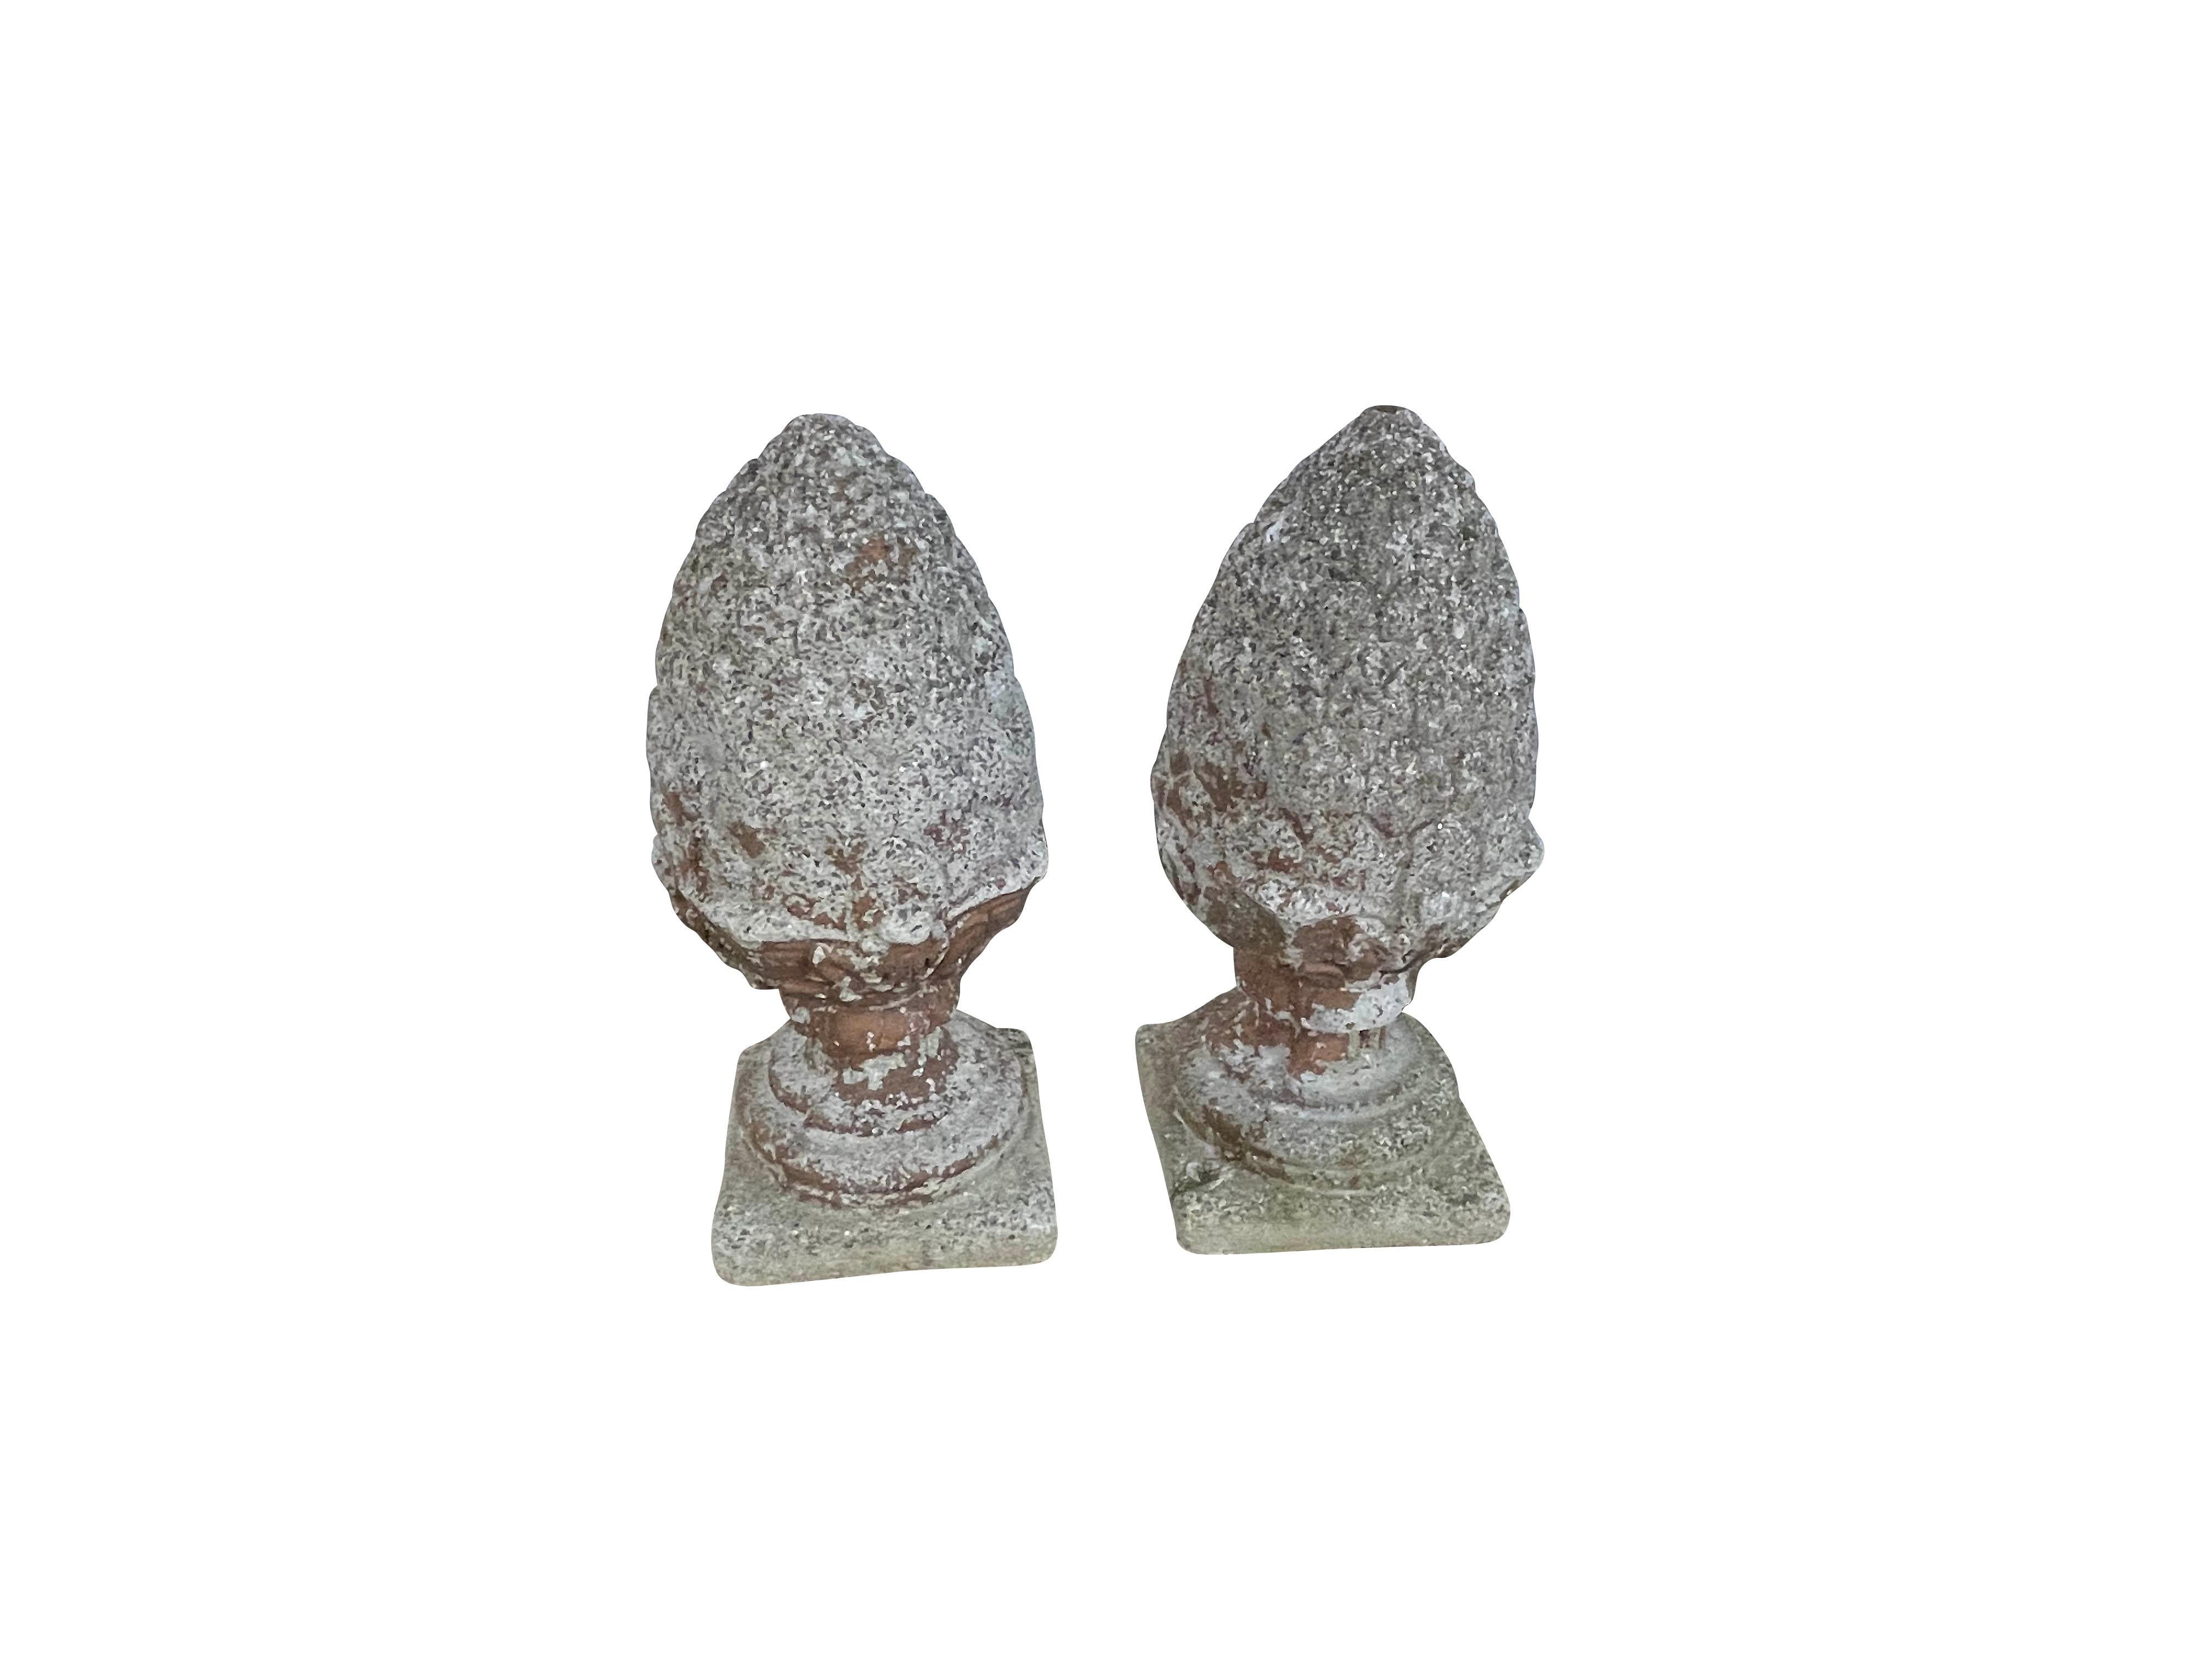 This pair of vintage pineapple finials was cast using reconstituted stone circa the 1960’s. Both pineapples have a molded foot and neck above a square plinth. The large slips above have curled foliate design tips, covering the lower section of the